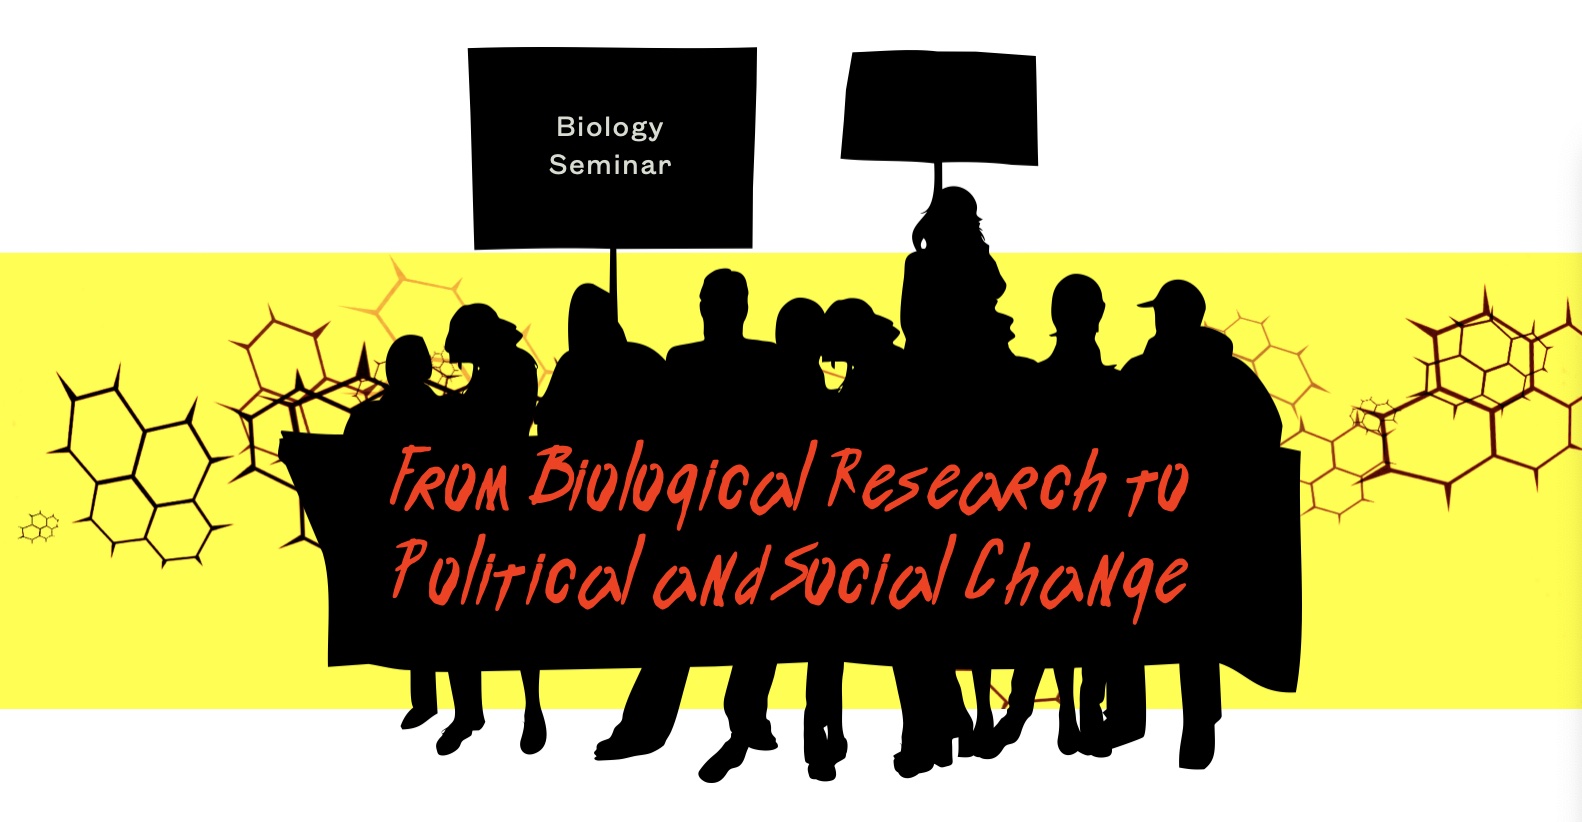 From Biological Research to Political and Social Change